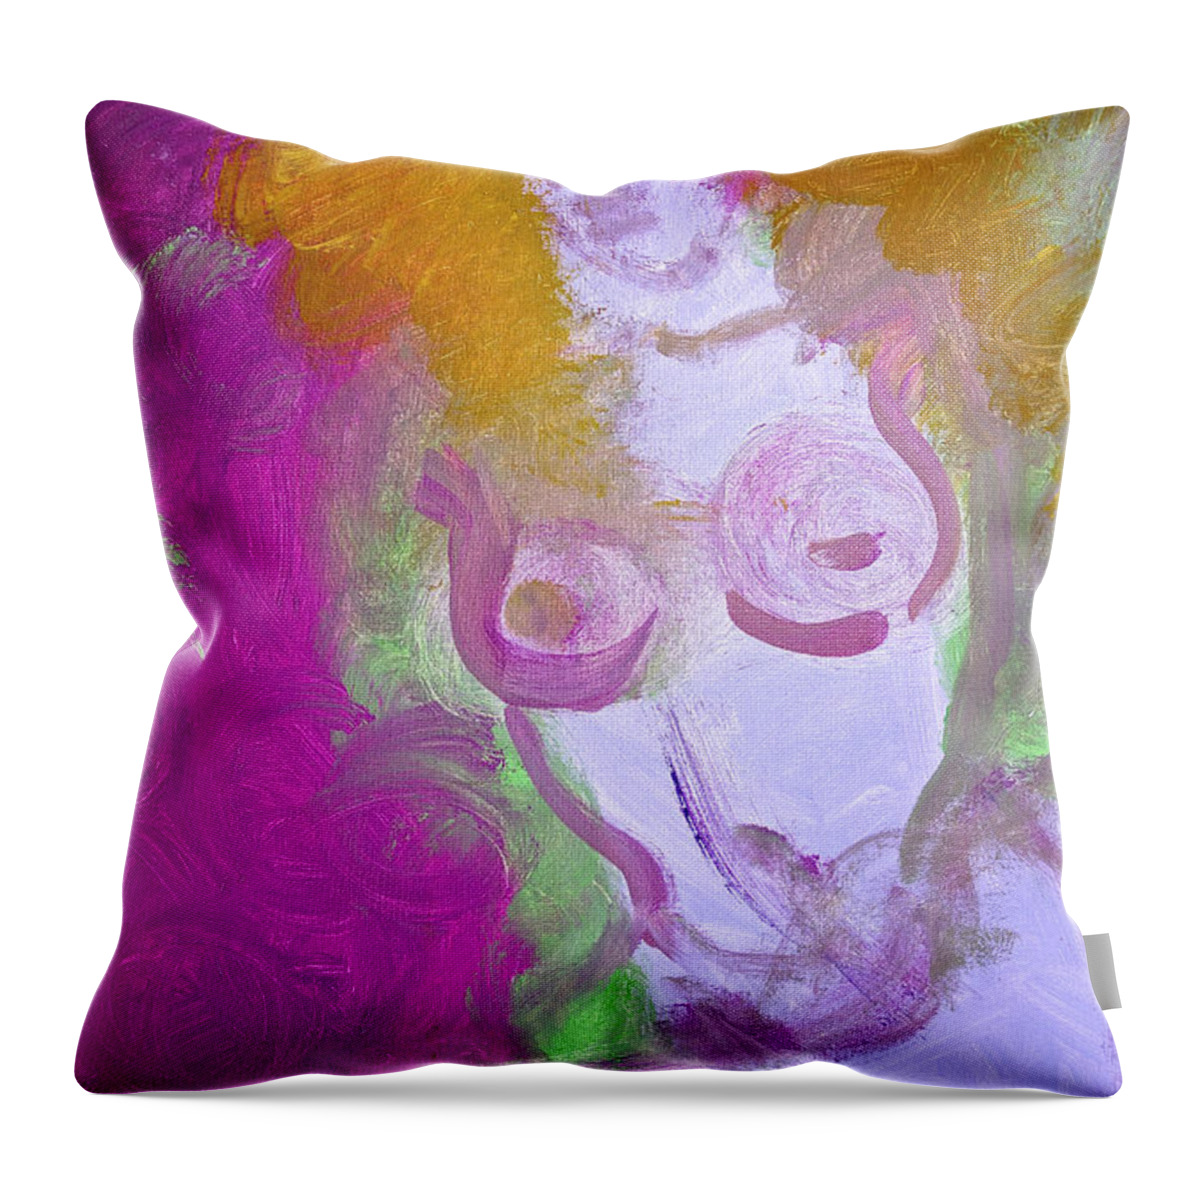 Nude Female Throw Pillow featuring the painting Pink Lady by Joan Reese